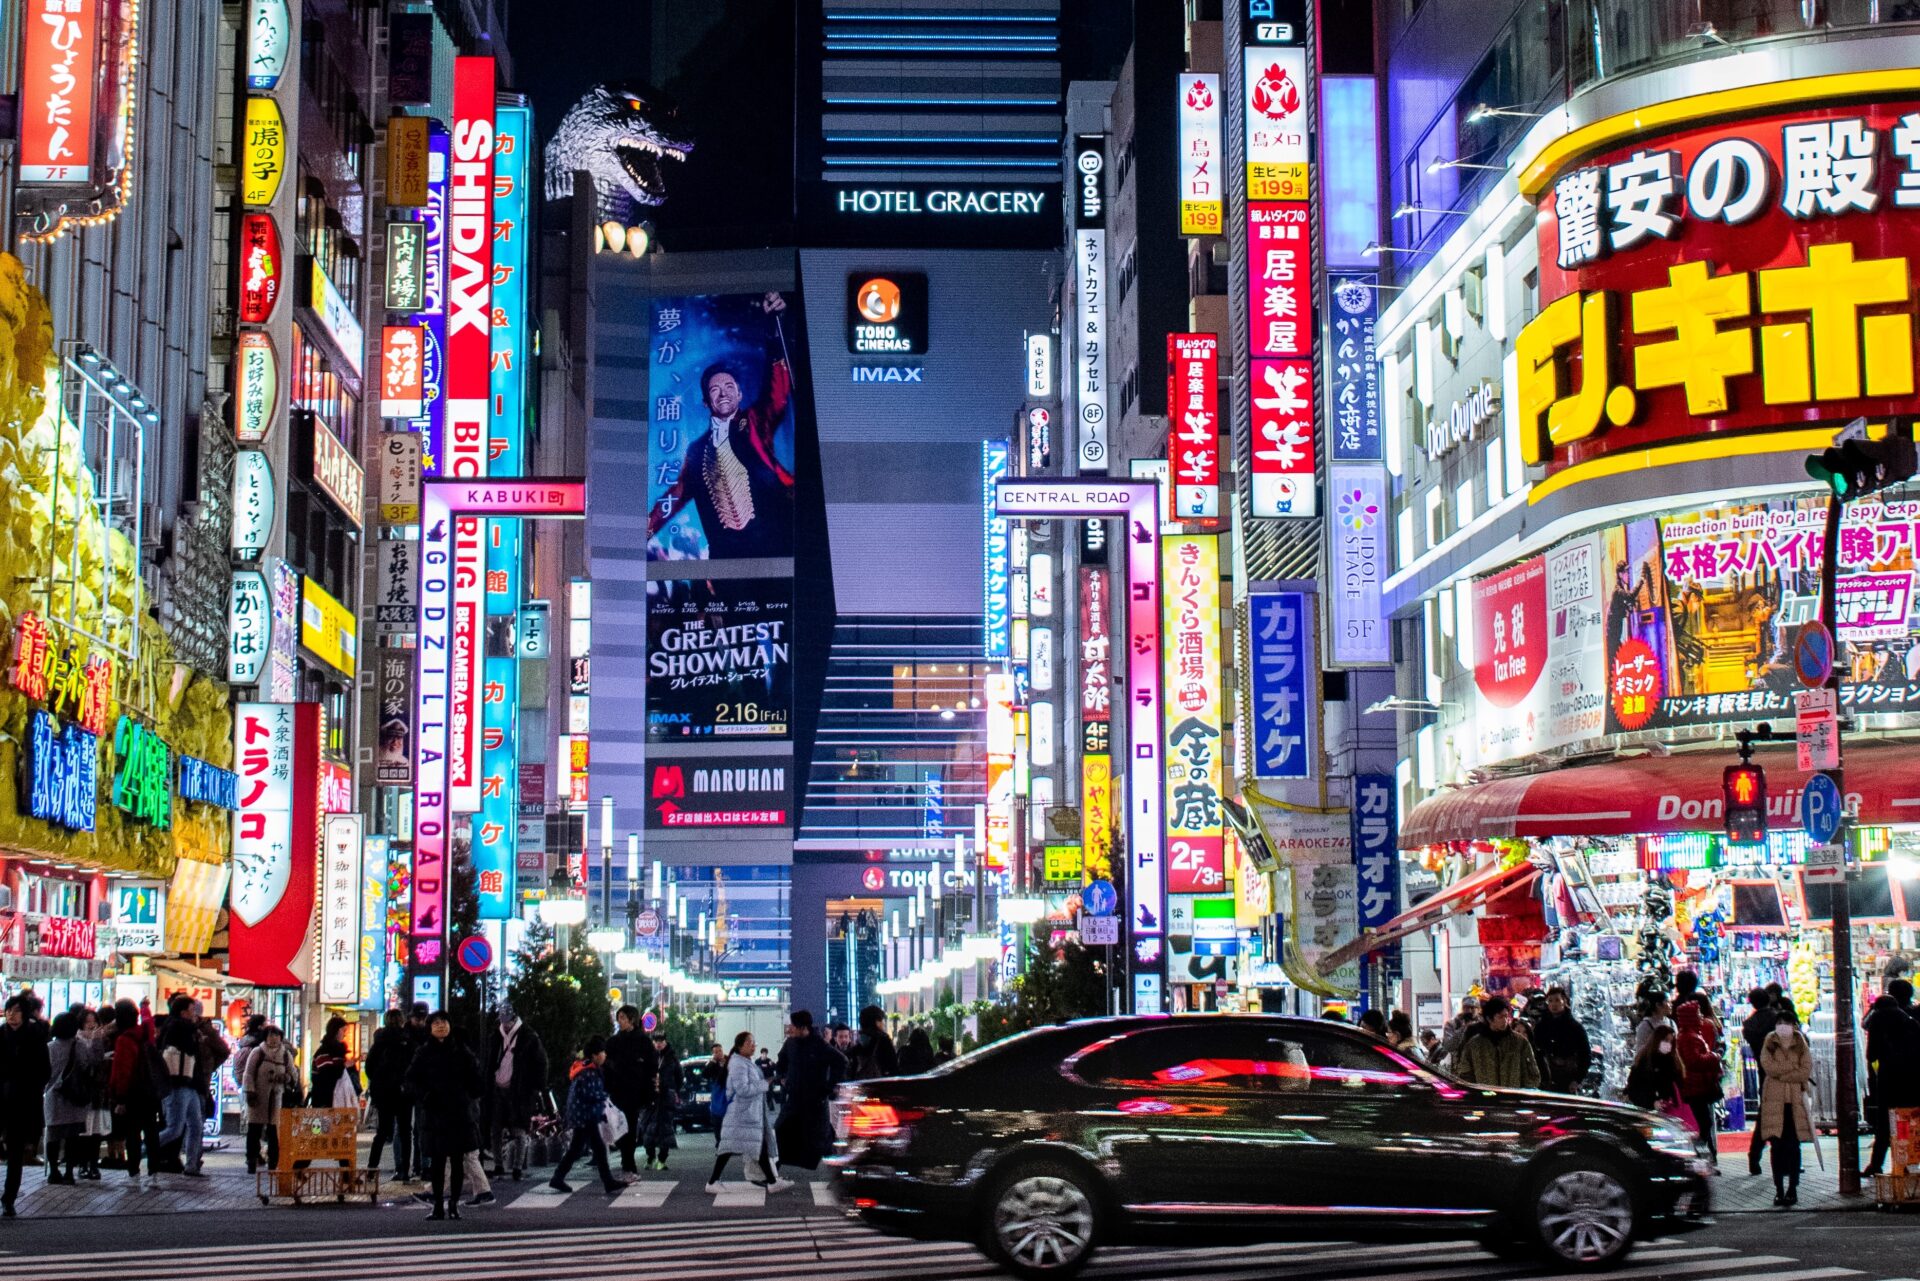 A Brand New Must-See Location in Shinjuku, Tokyo - Japan's Largest